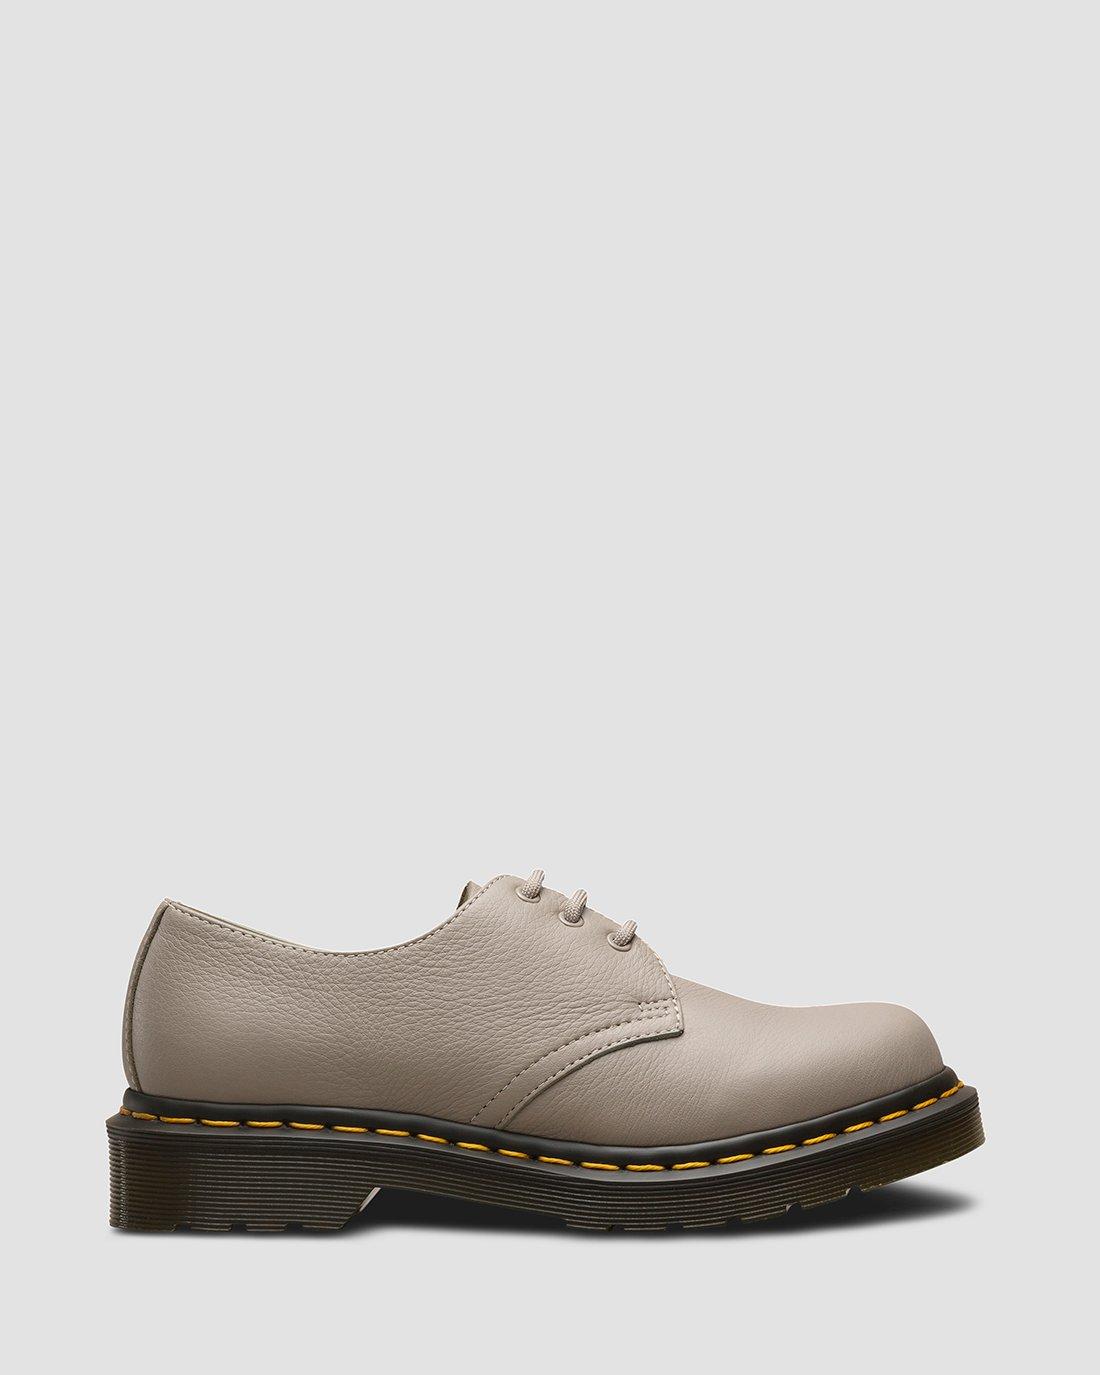 1461 Women's Virginia Leather Oxford Shoes | Dr. Martens